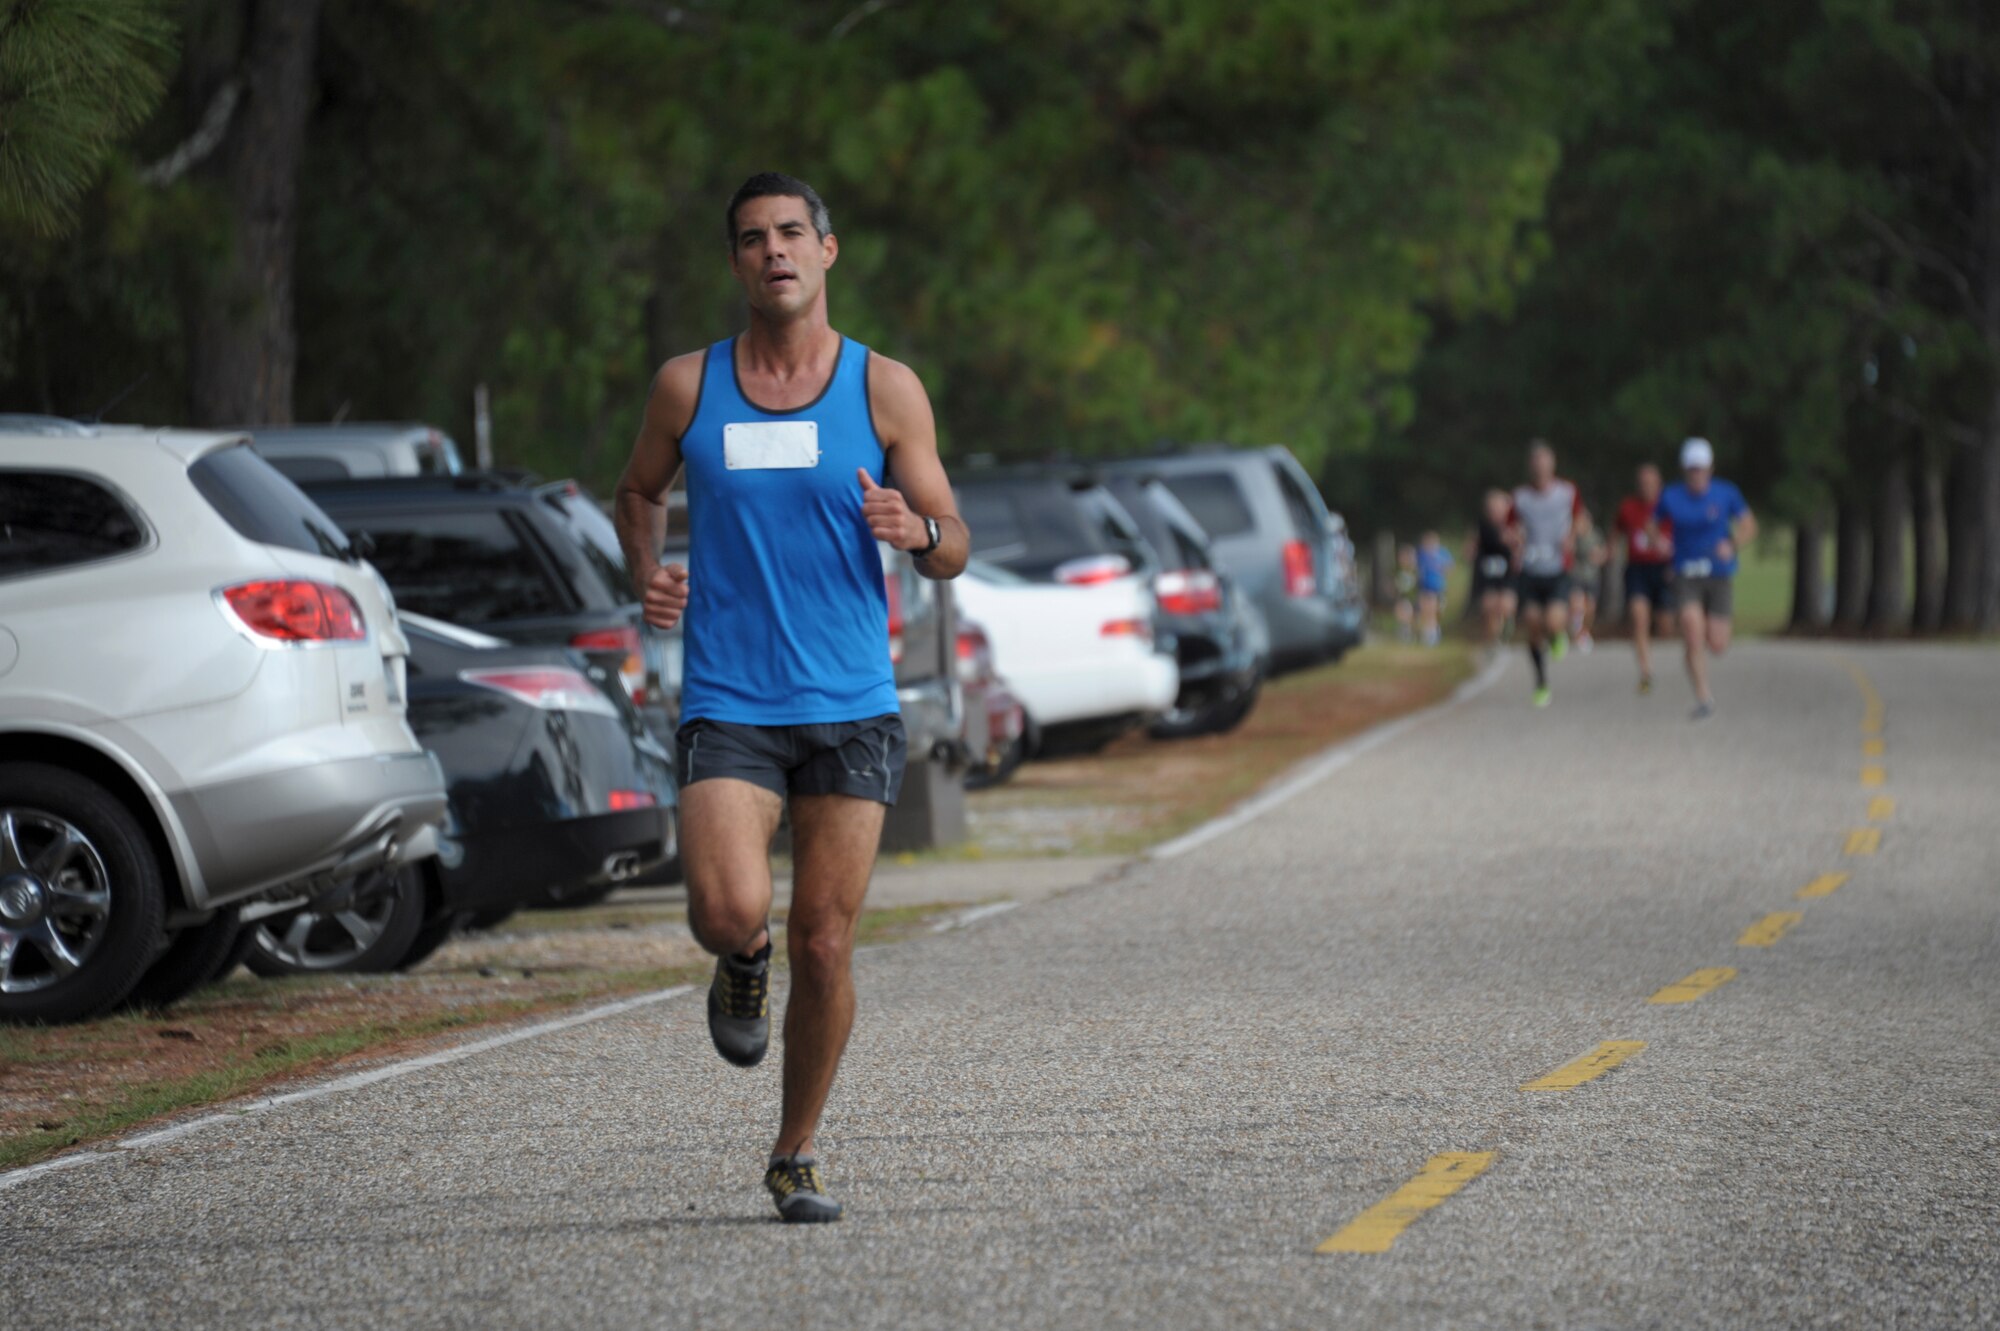 A student from Air Command and Staff College competes in a 5K race on Maxwell Air Force Base, Oct. 8. The race was part of a 2-day competition between ACSC and Air War College, compiling of approximately 20 events, both scholastic and athletic. (U.S. Air Force photo by Airman 1st Class William Blankenship)